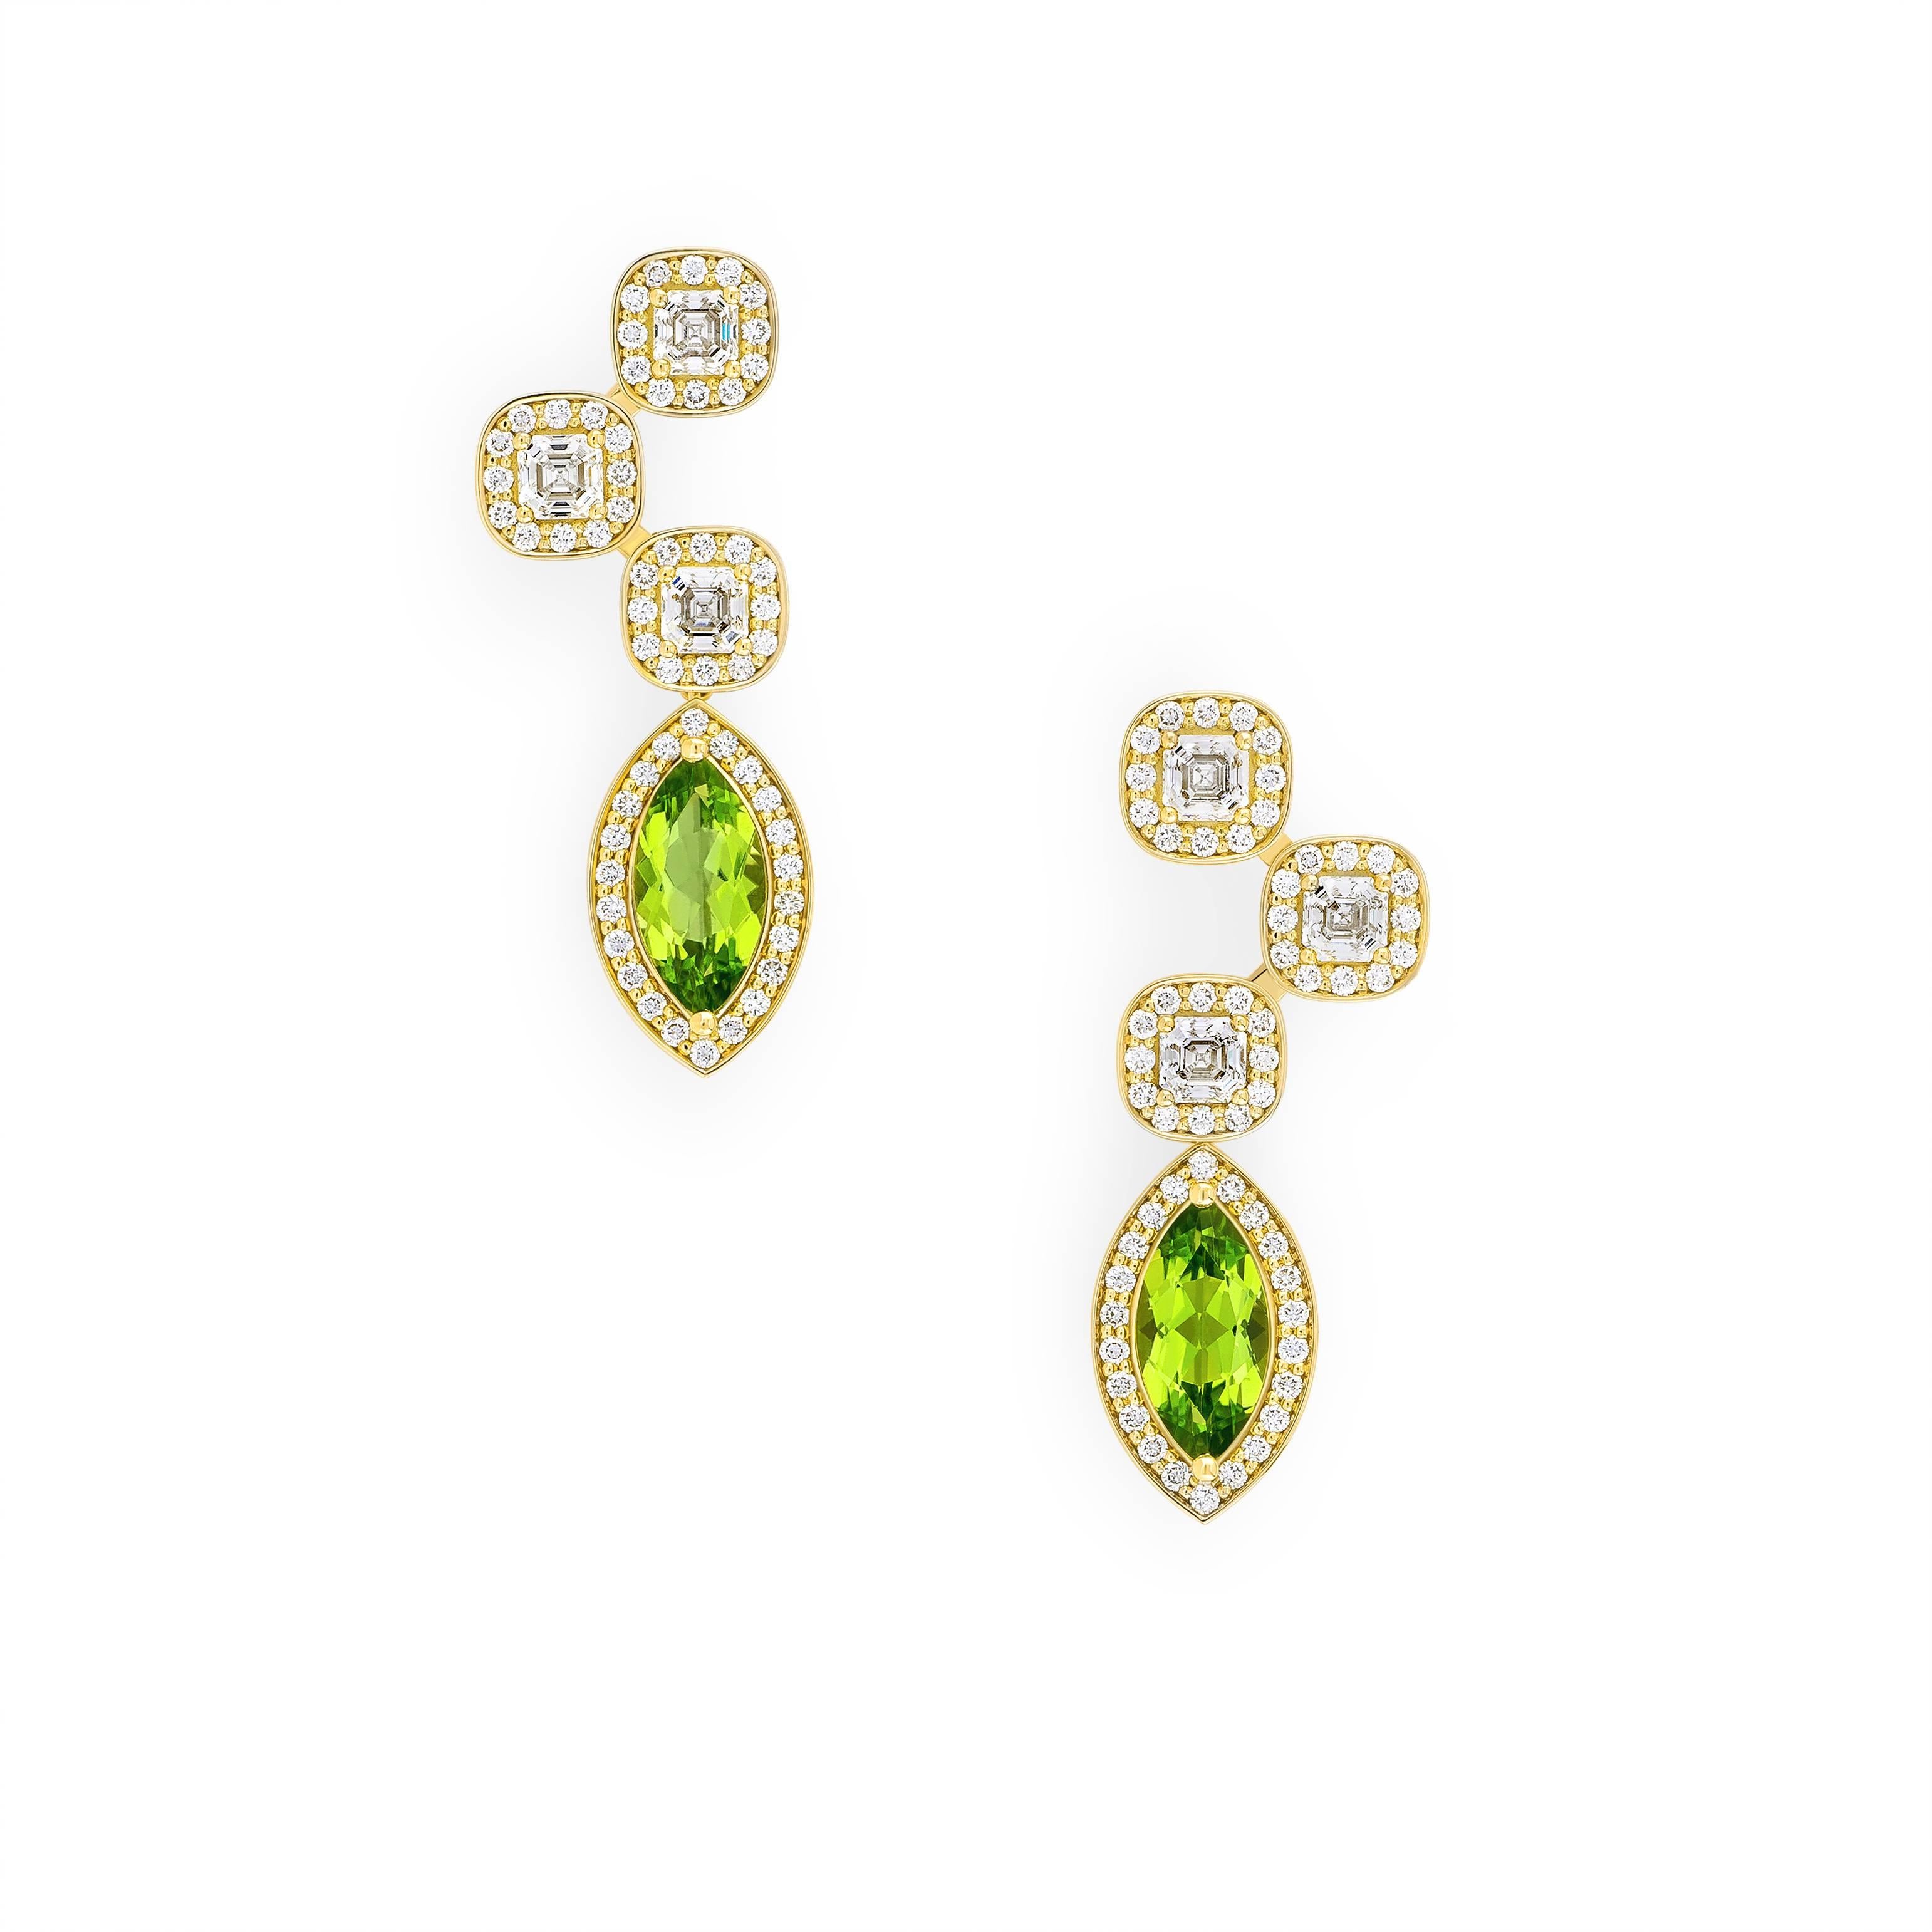 Regal, stately and bold, the Magnificent Earrings are every bit as majestic as their namesake, the Magnificent Bird of Paradise. Crafted in 18k Fairtrade gold, this piece features six natural Asscher cut diamonds (1.5 tct), two green peridot (2.4